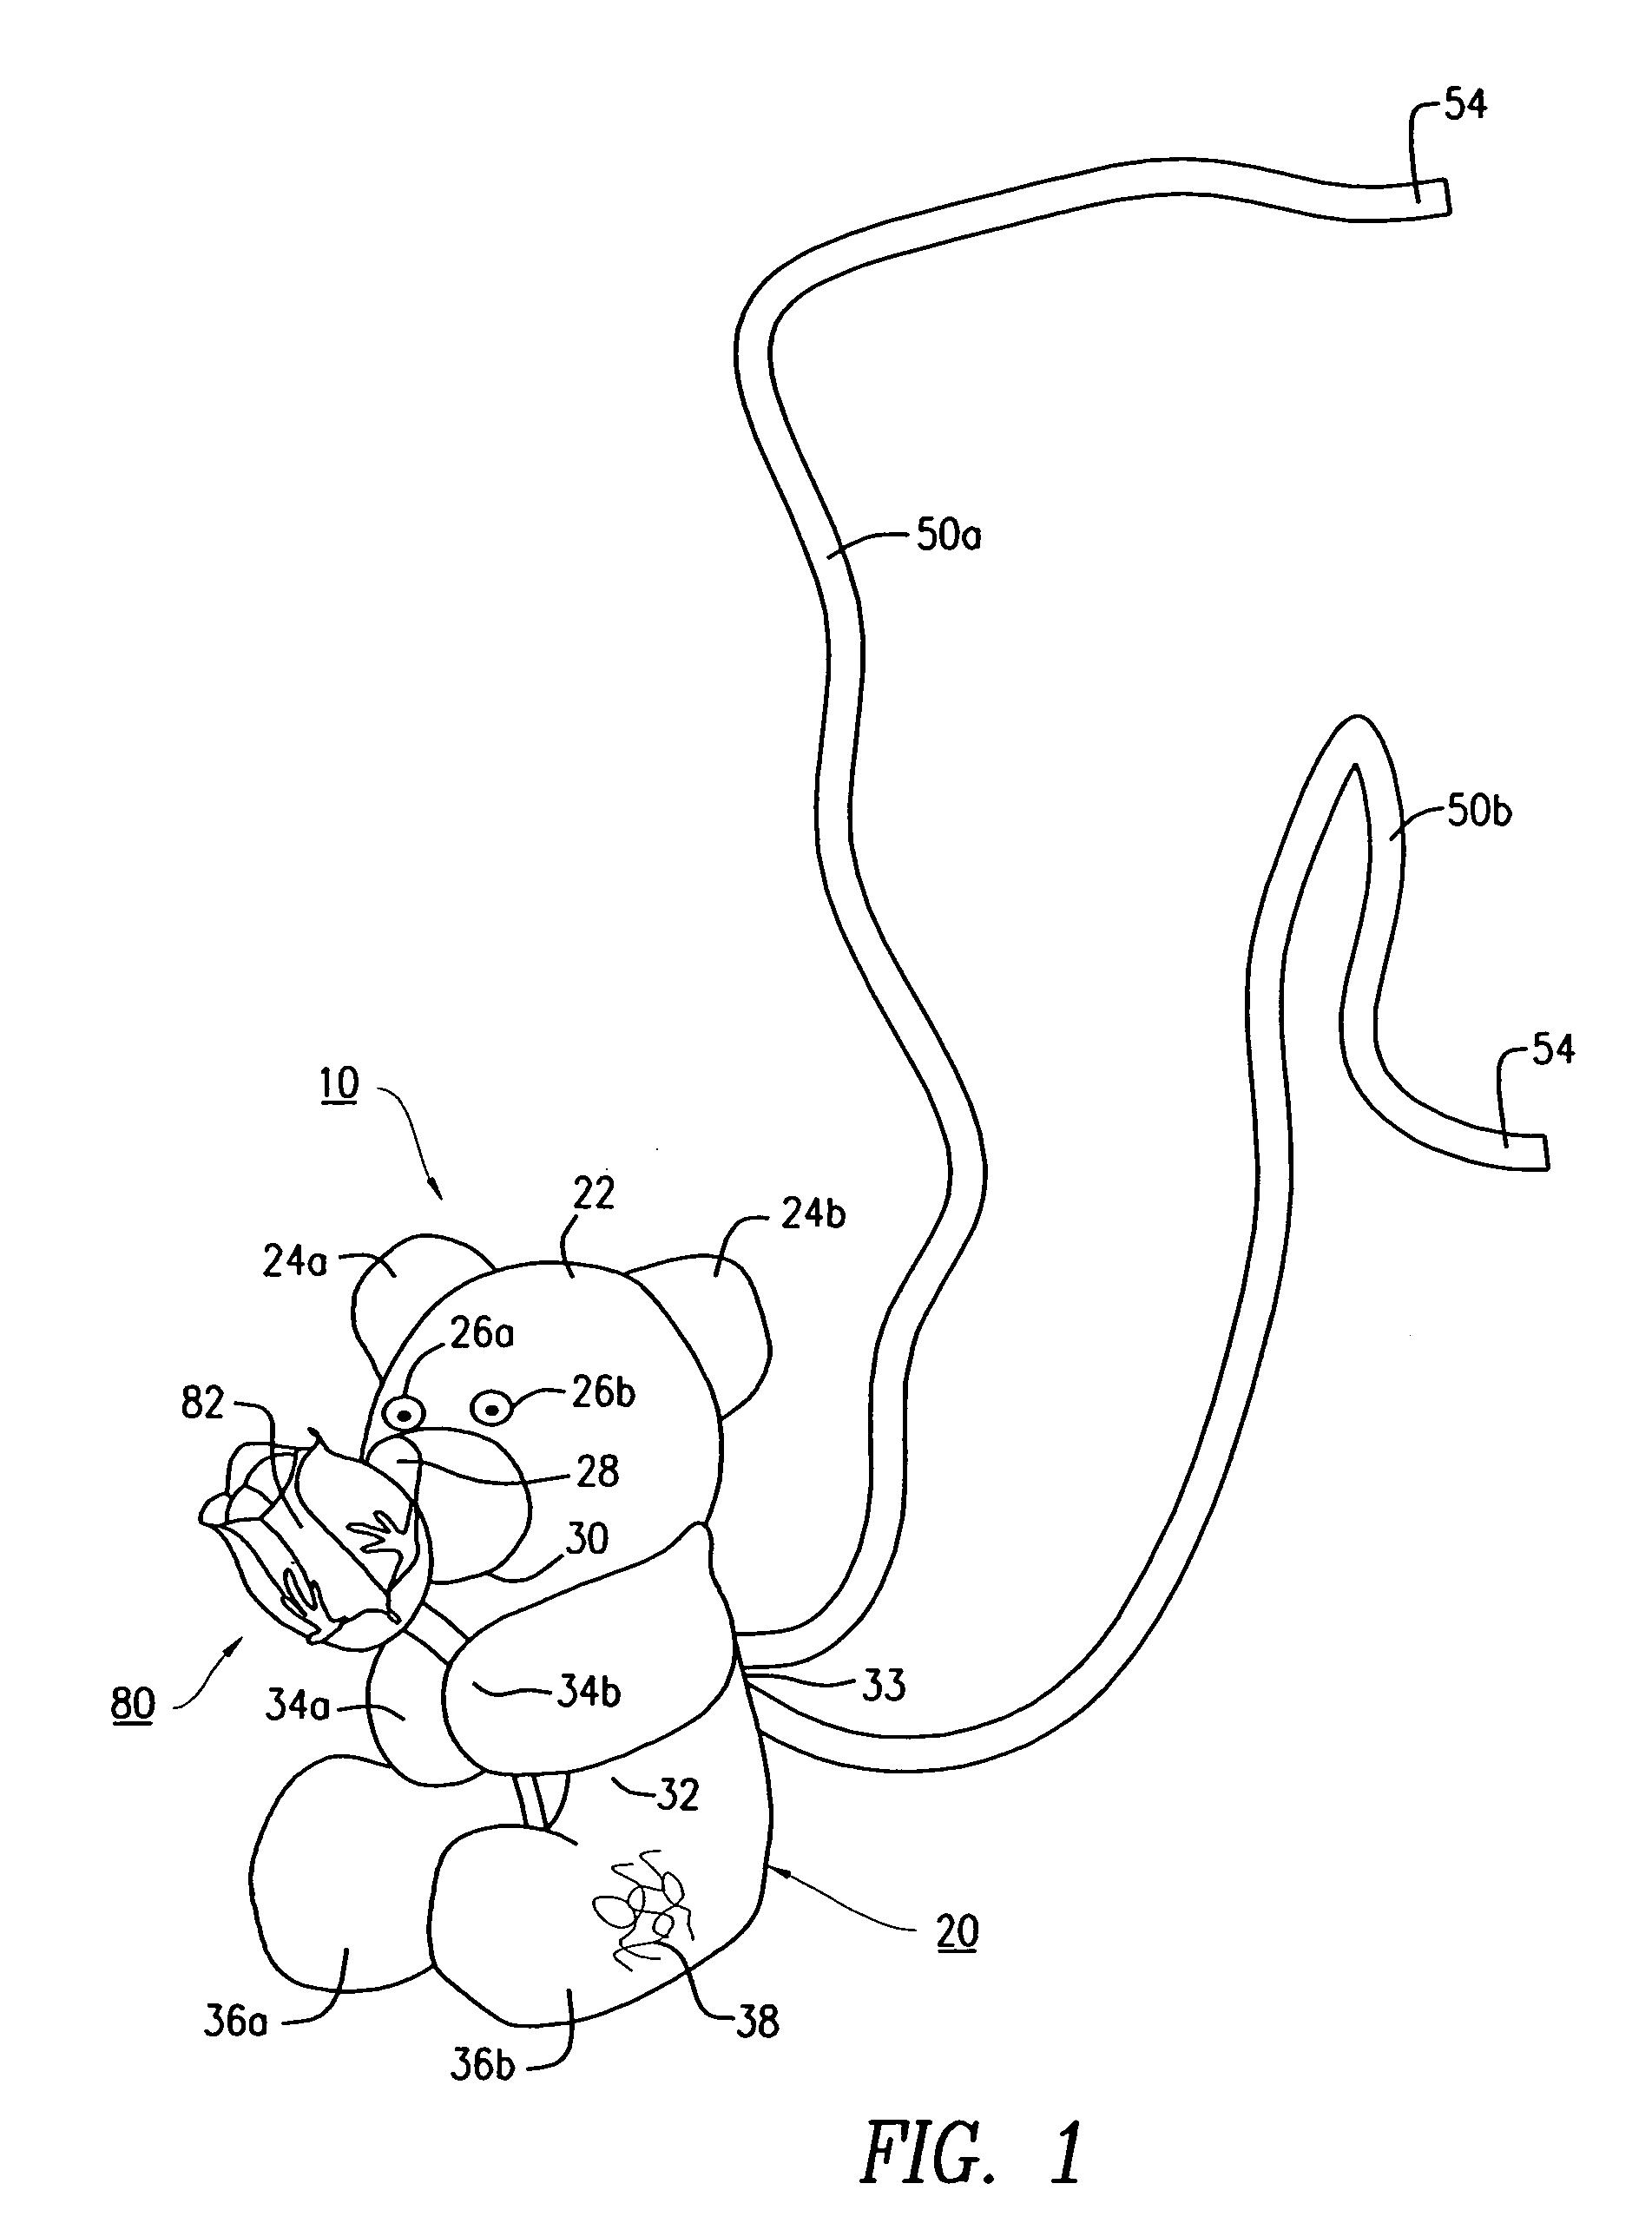 Plush toy having an integral built-in storage compartment for dispensing a ribbon therefrom